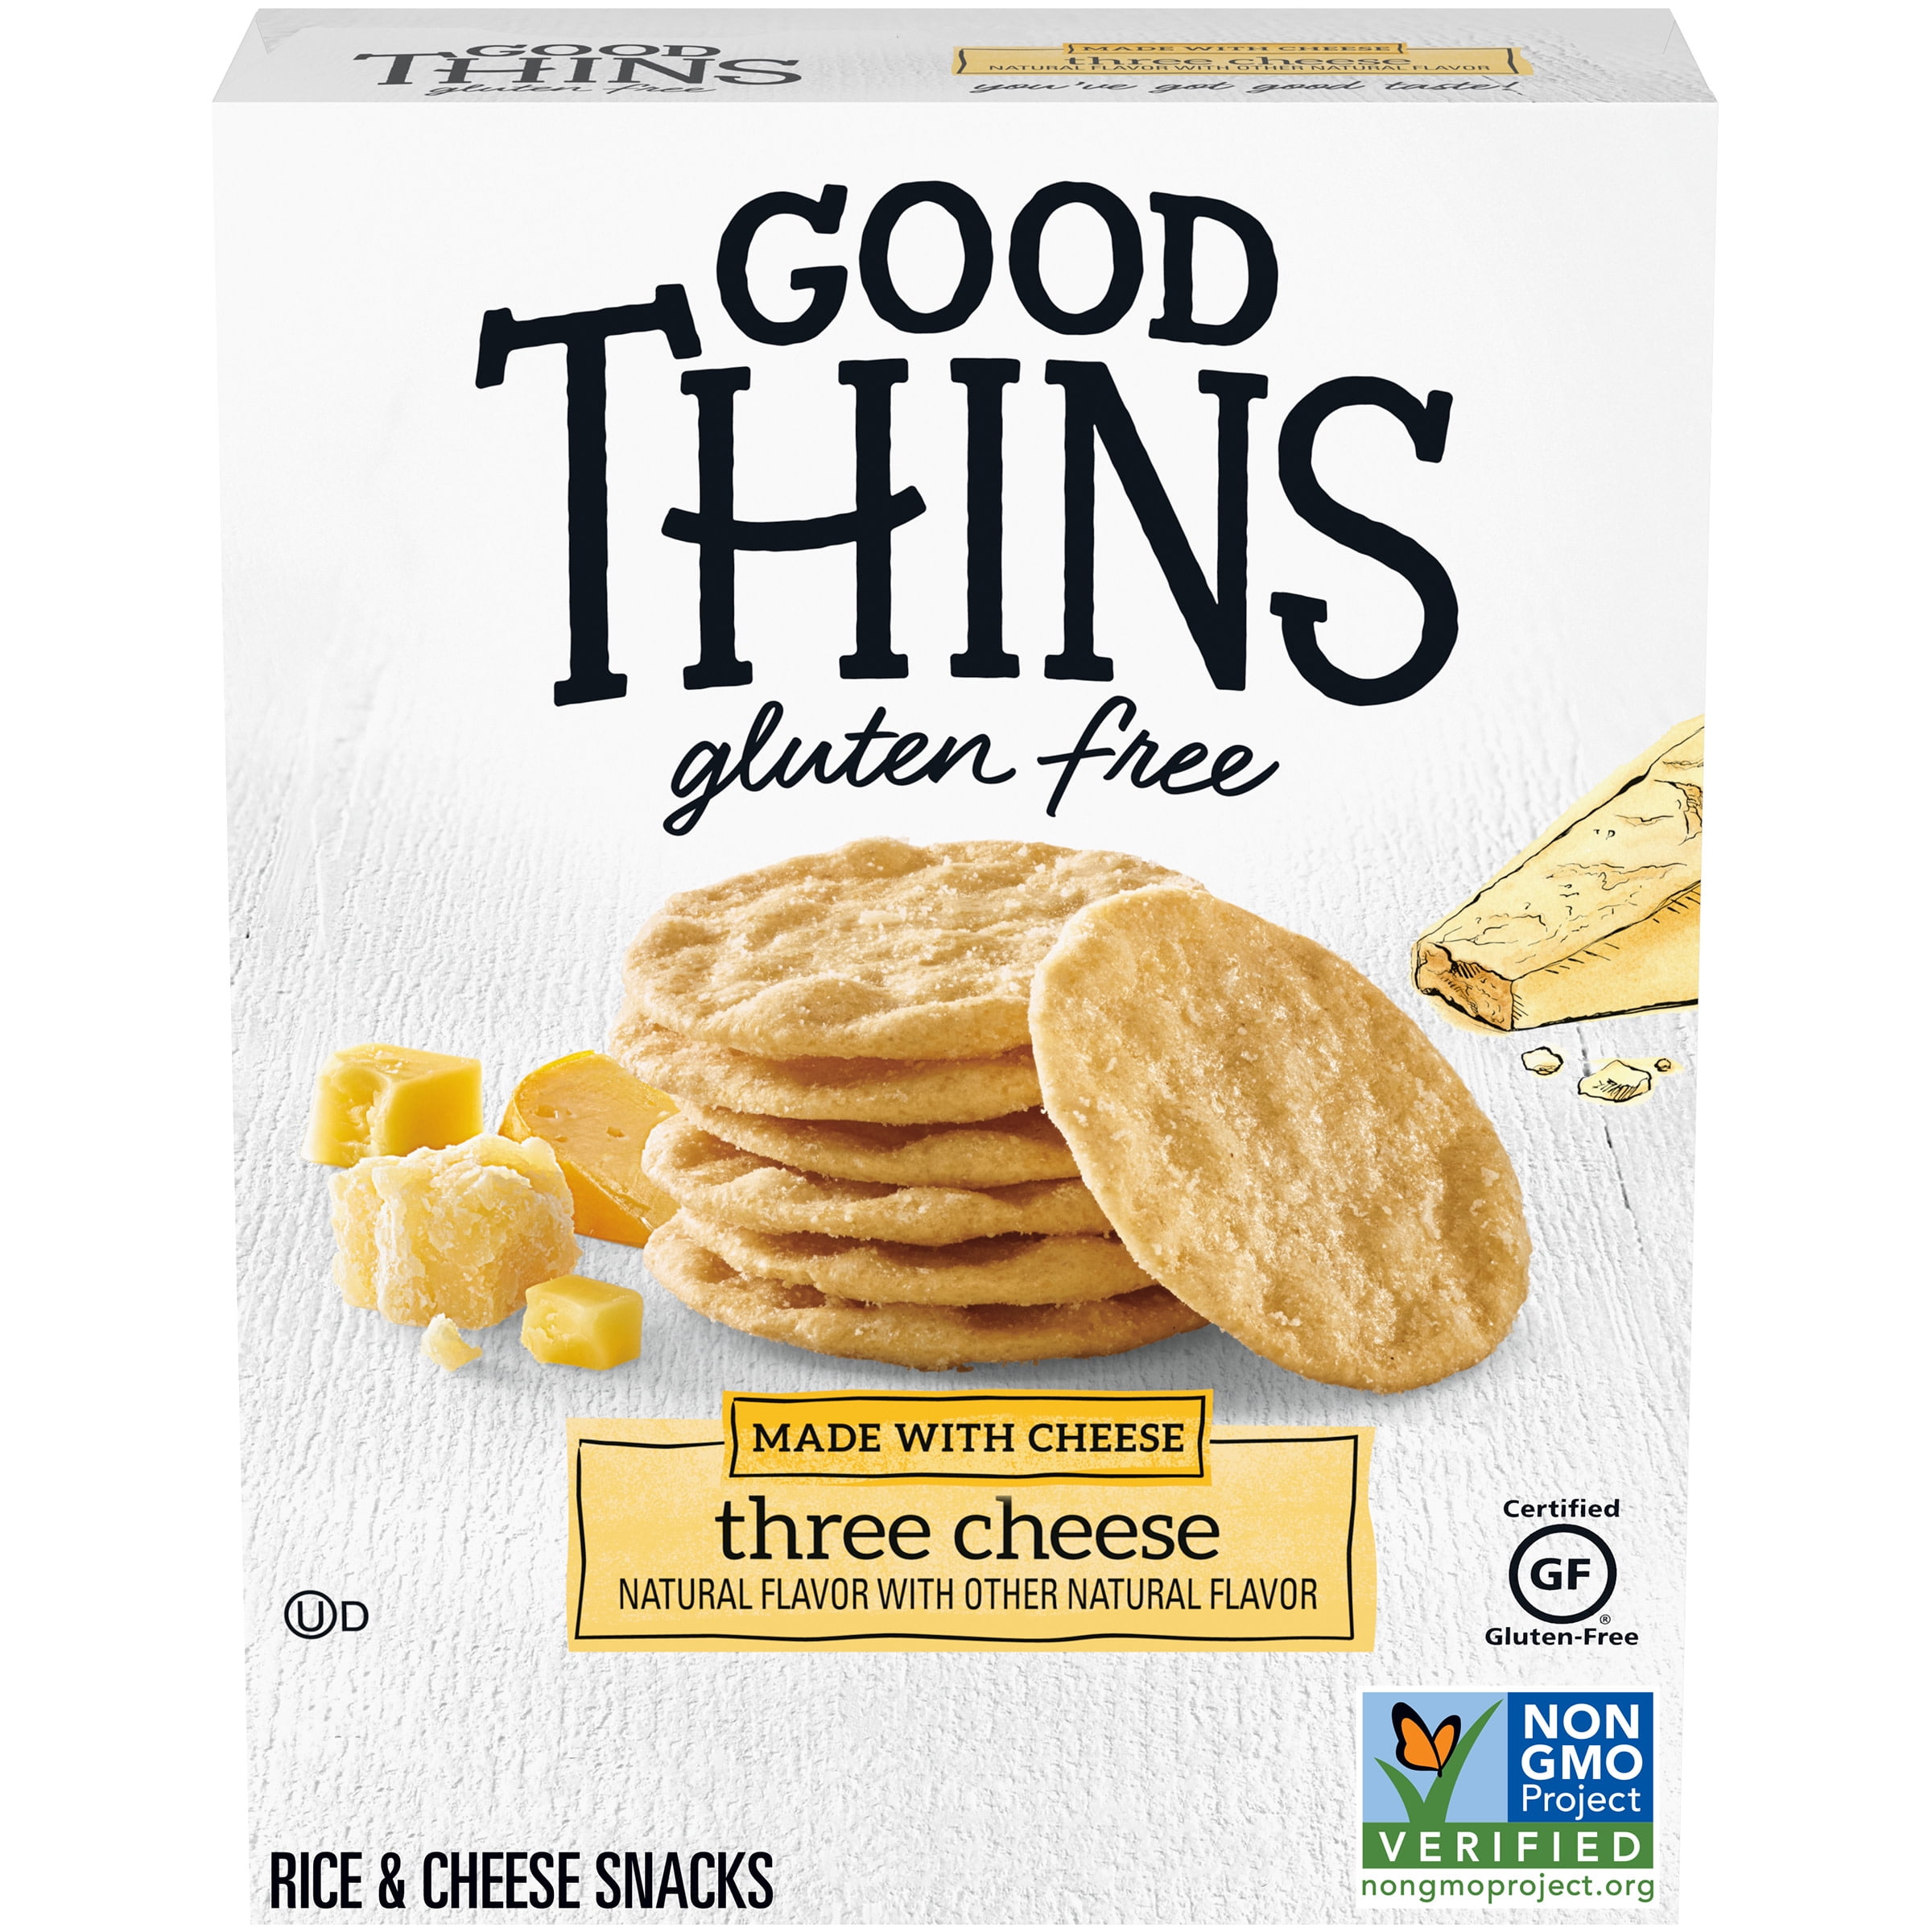 GOOD ThiNS, 2016-03-16, Snack and Bakery